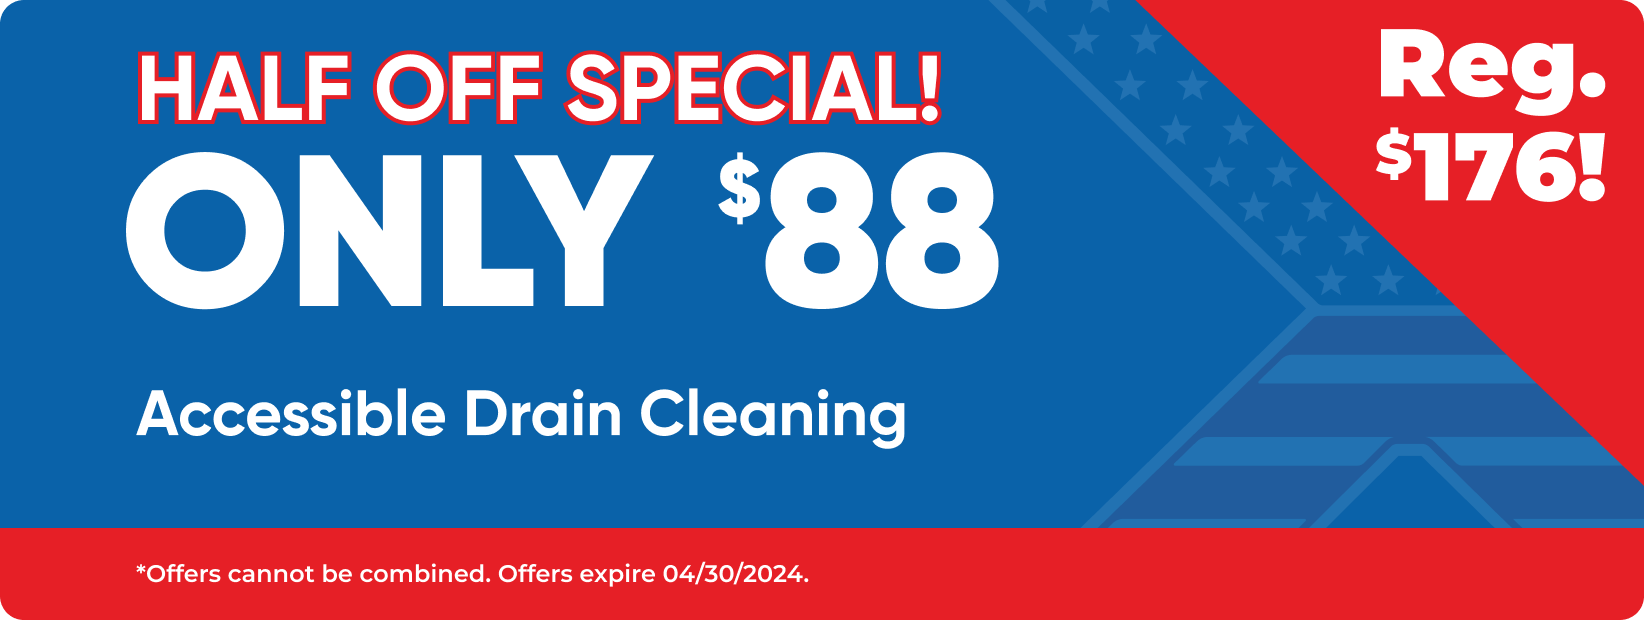 $44 Drain Cleaning Coupon